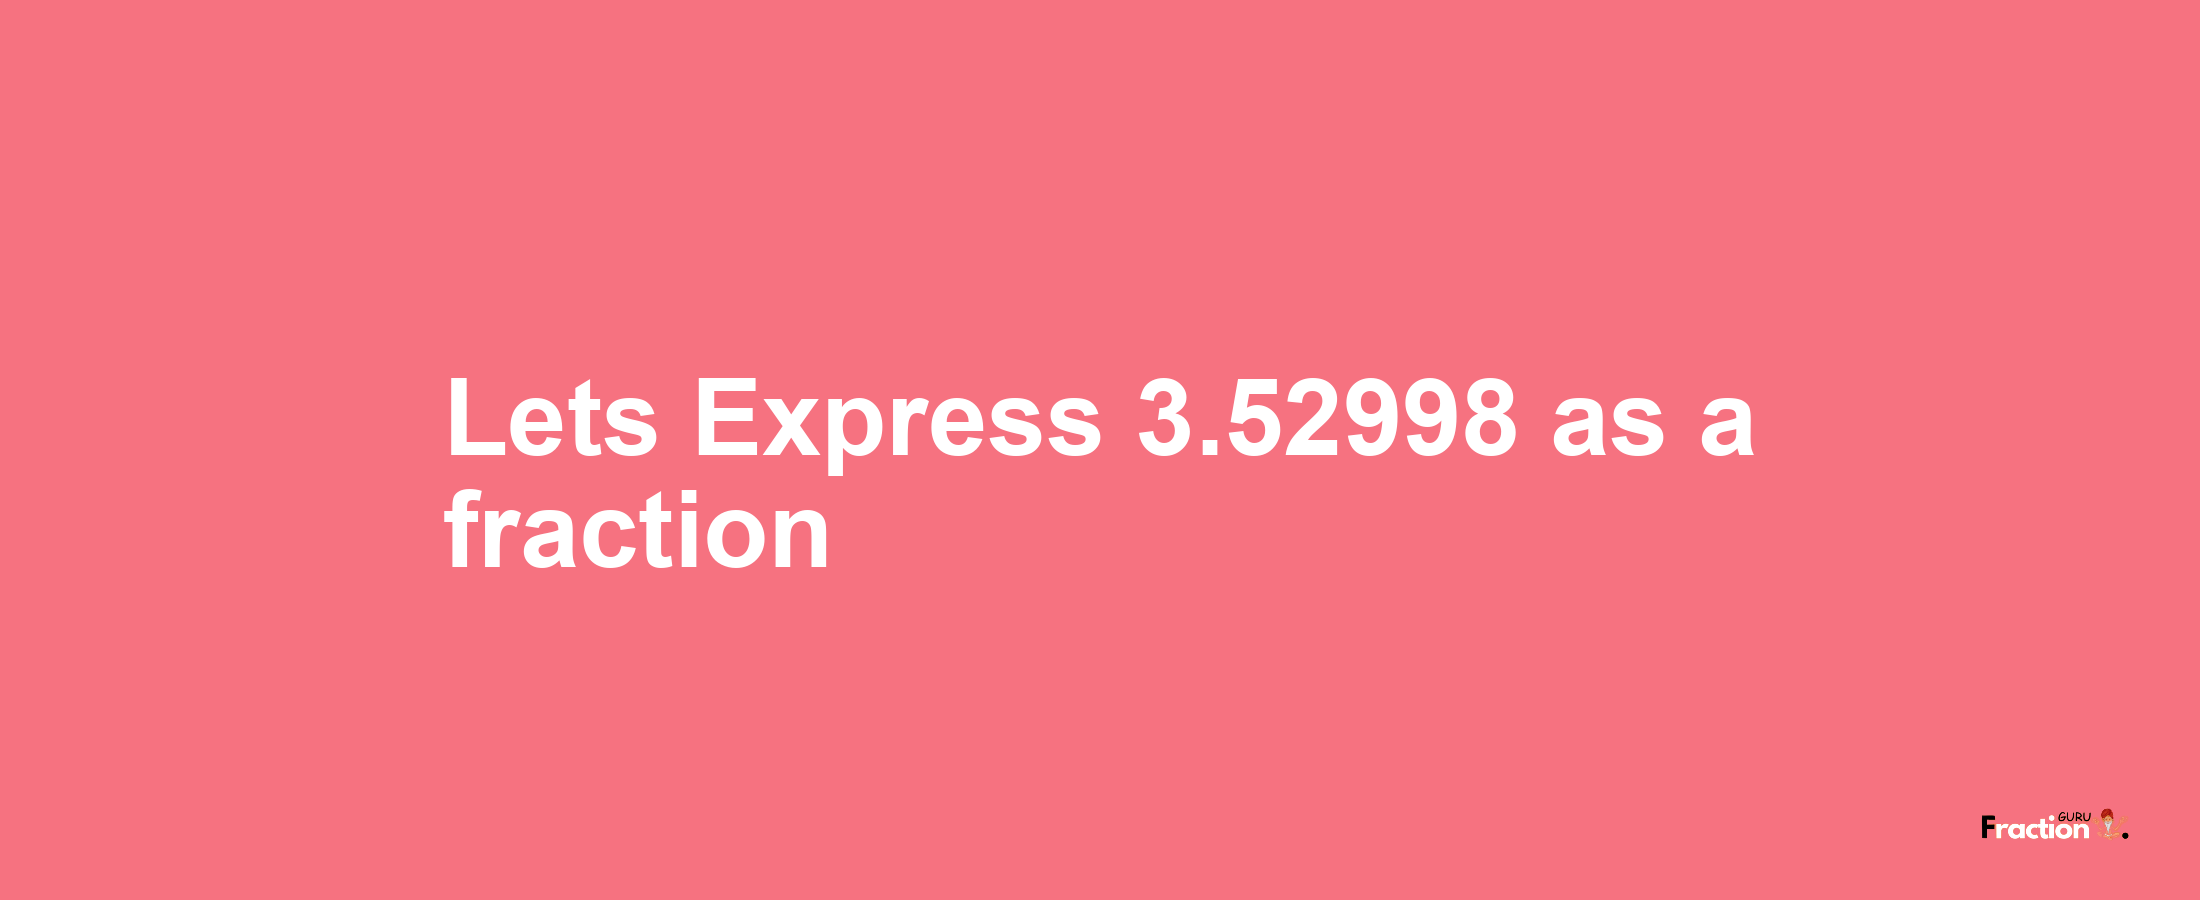 Lets Express 3.52998 as afraction